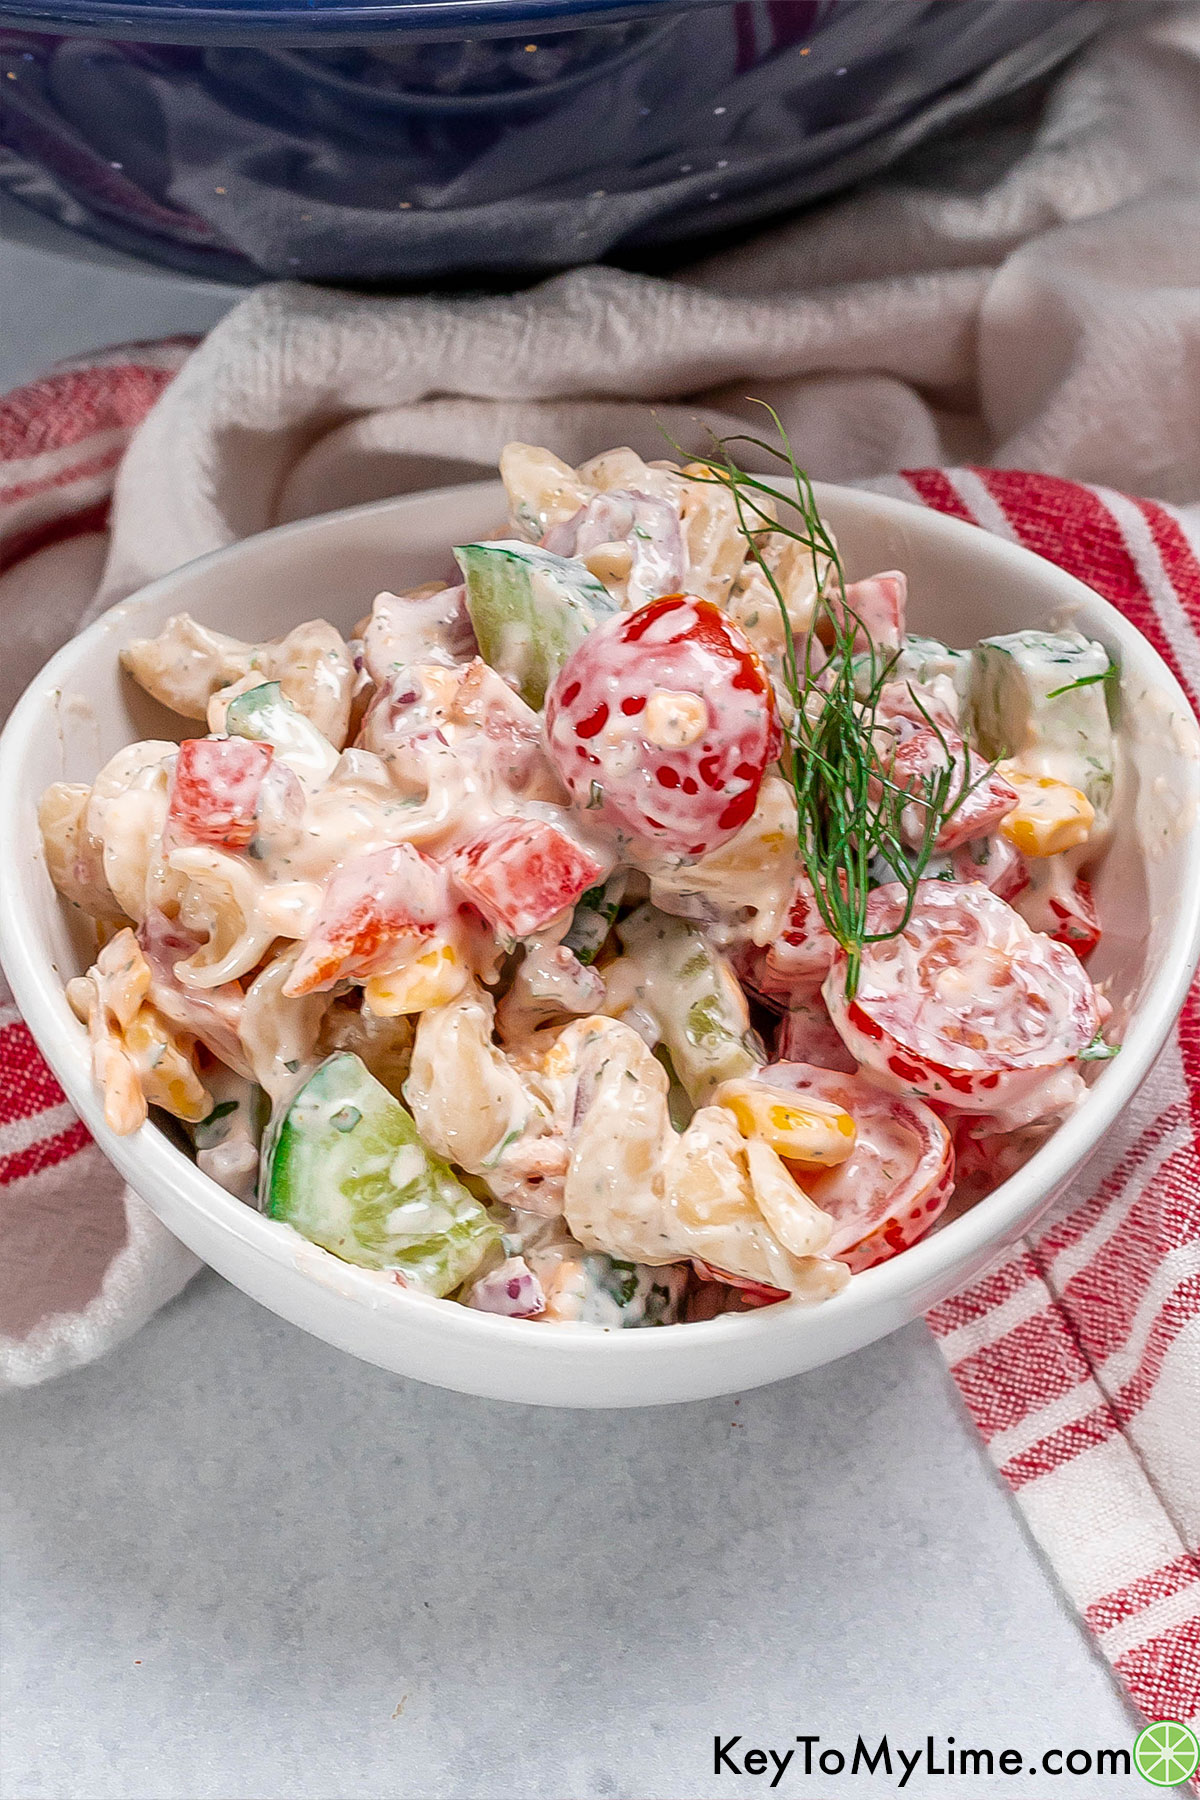 A creamy pasta salad dish garnished with fresh dill on top of a red napkin.